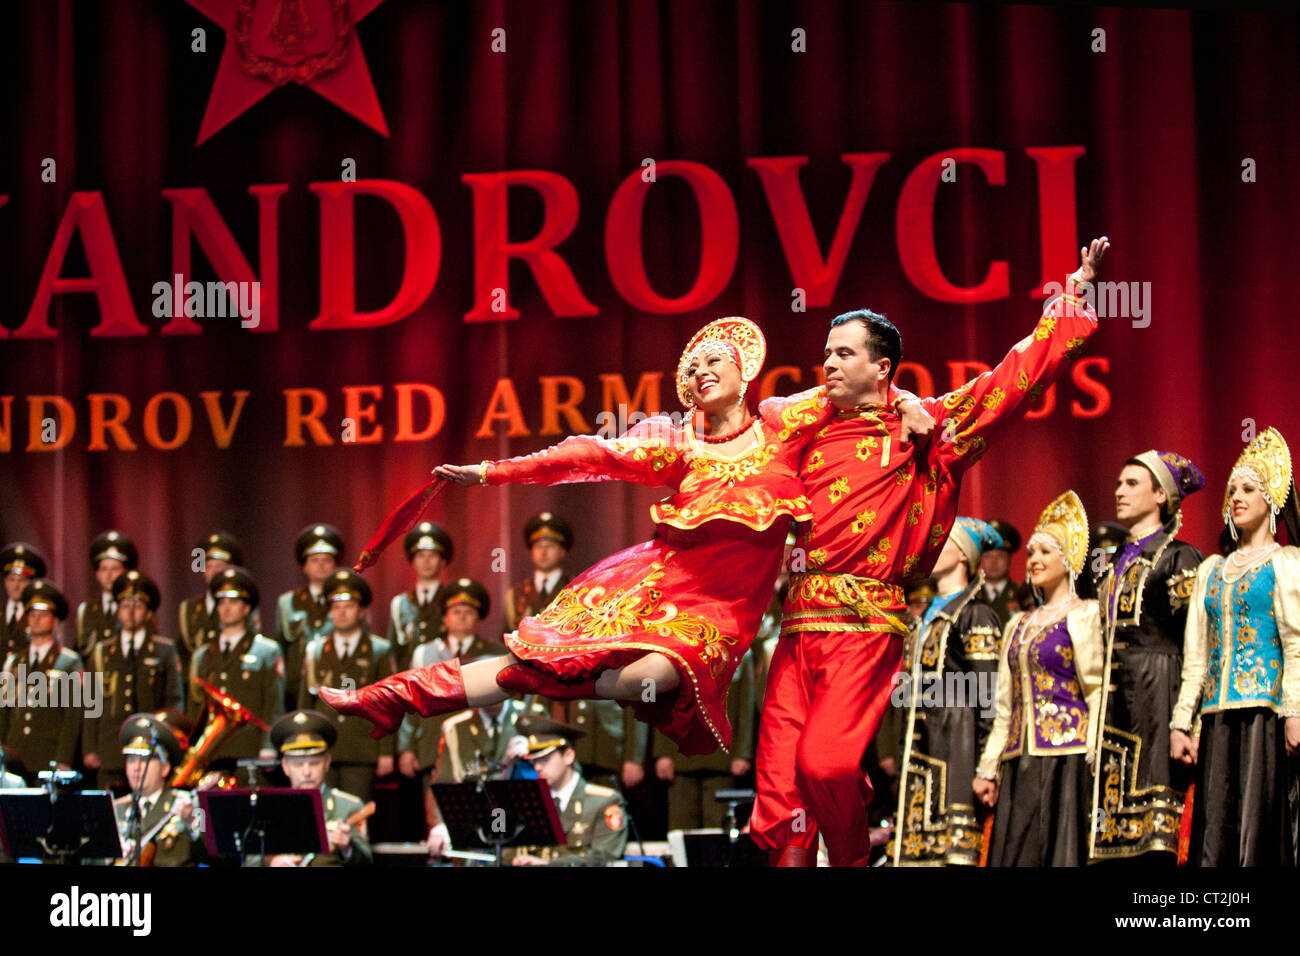 Alexandrov Ensemble The Russian Red Army Choir Performs Concert In